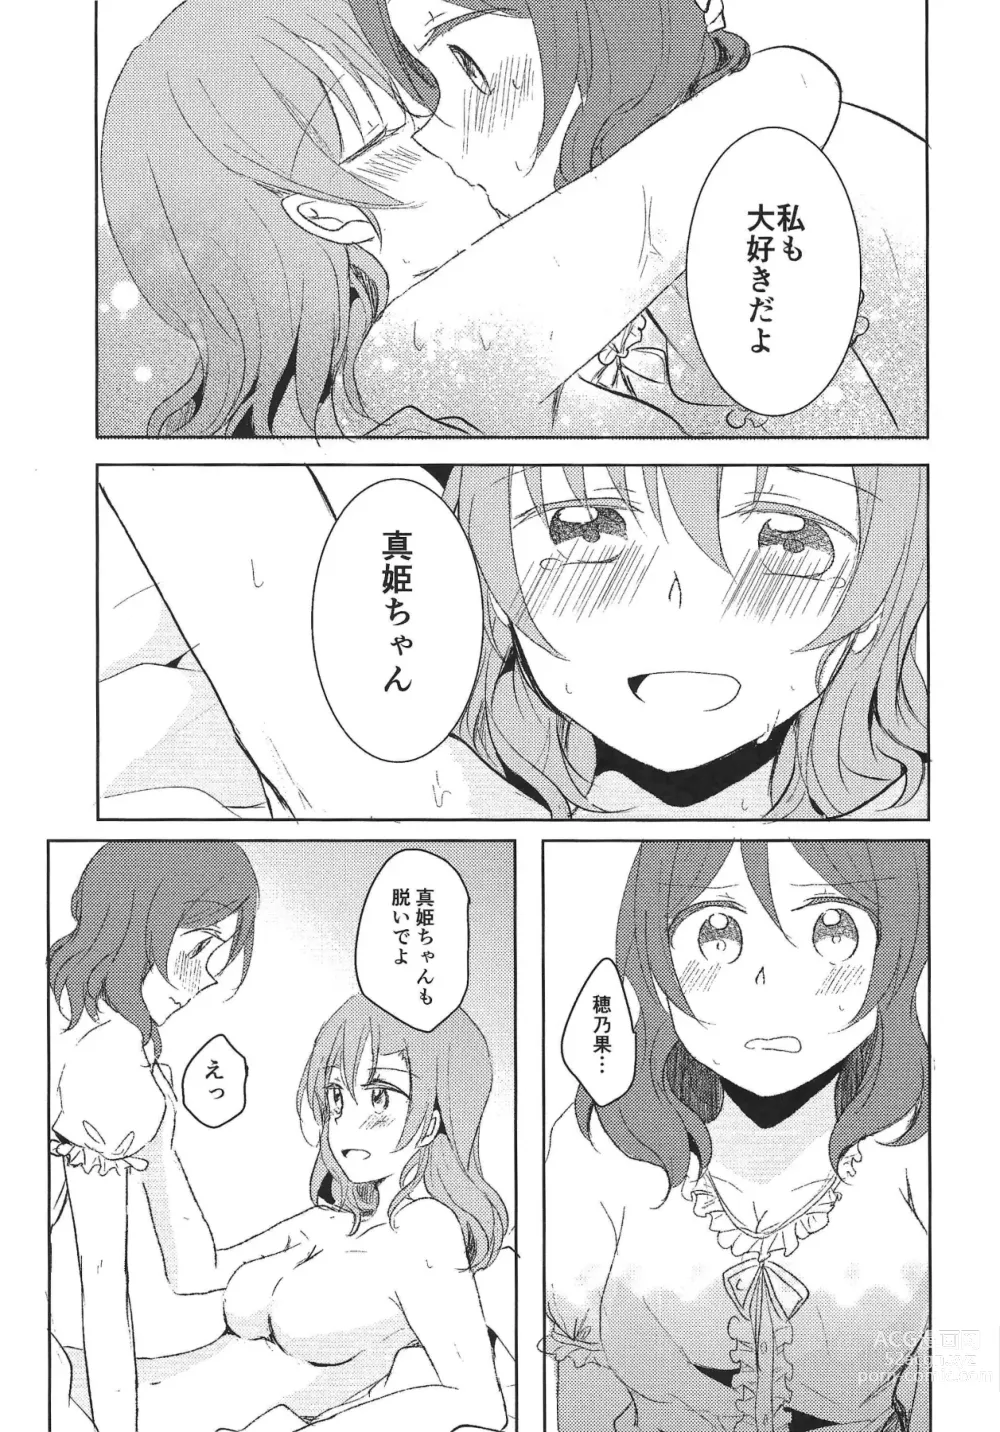 Page 22 of doujinshi LOVE STEP